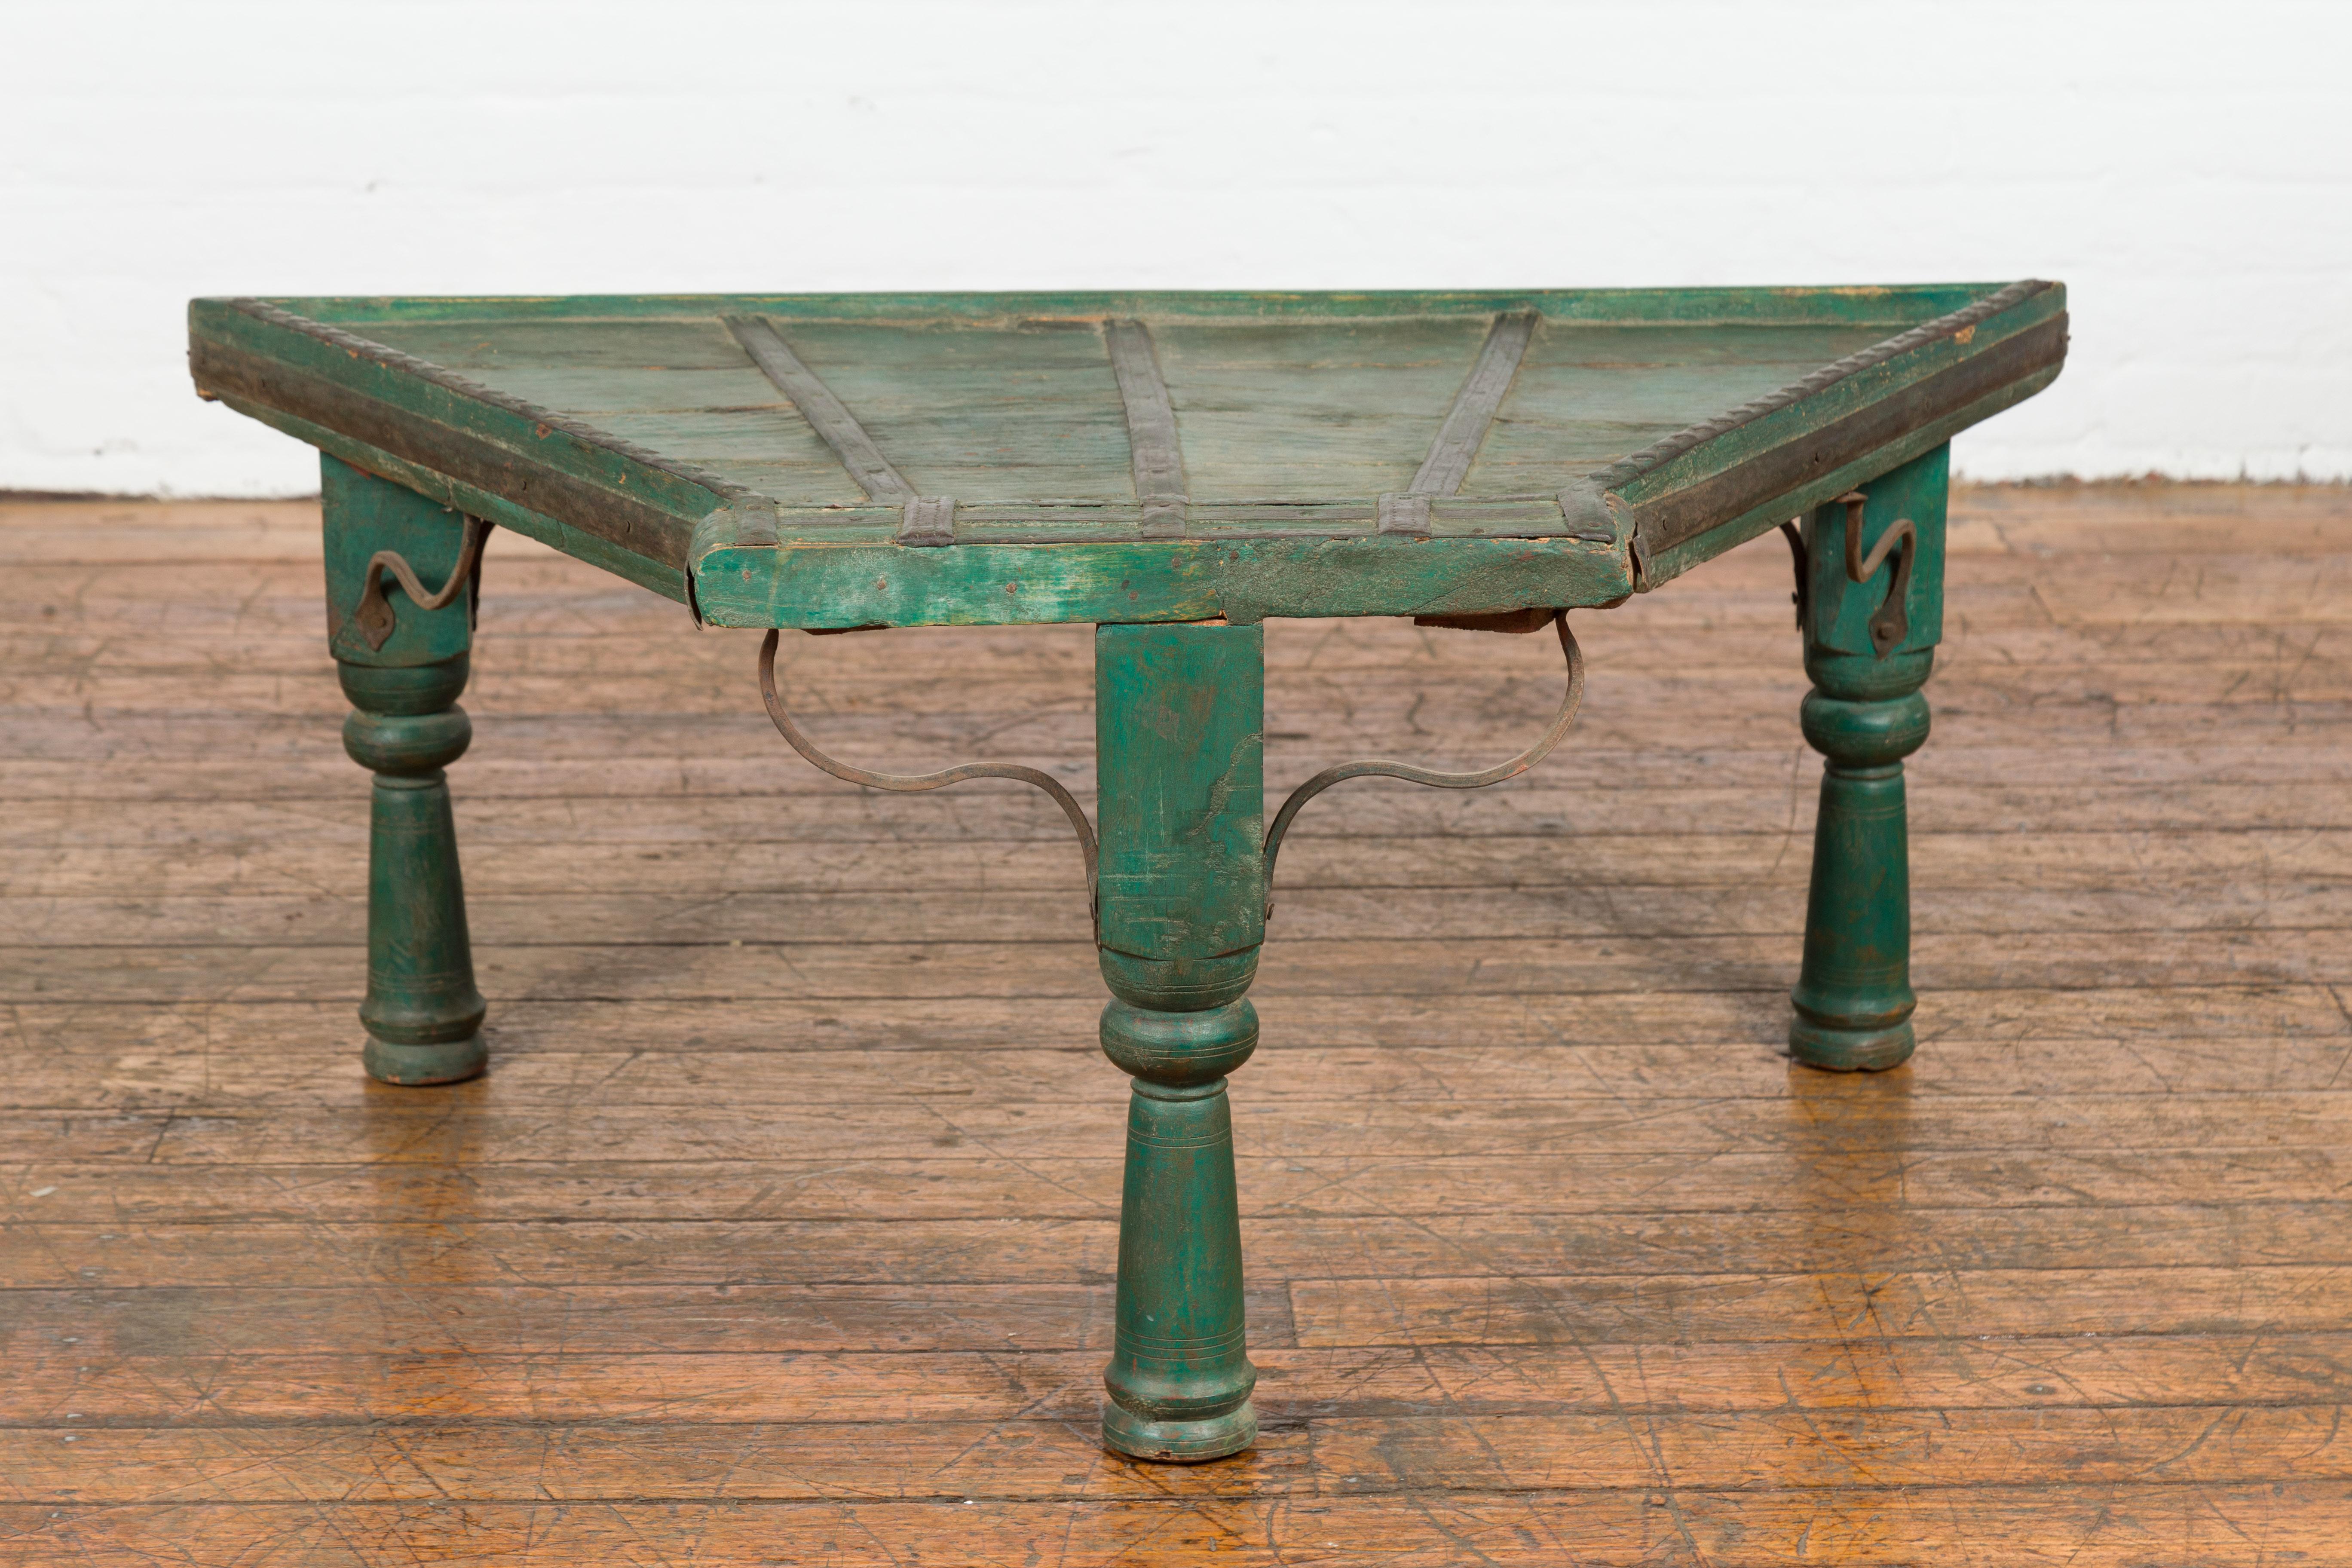 Rustic Indian green painted coffee table crafted from a repurposed bullock cart from the 19th century with curved iron stretchers, nicely weathered patina, turned baluster Legs, iron braces, diamond motifs on the top's edges and wavy patterns in the